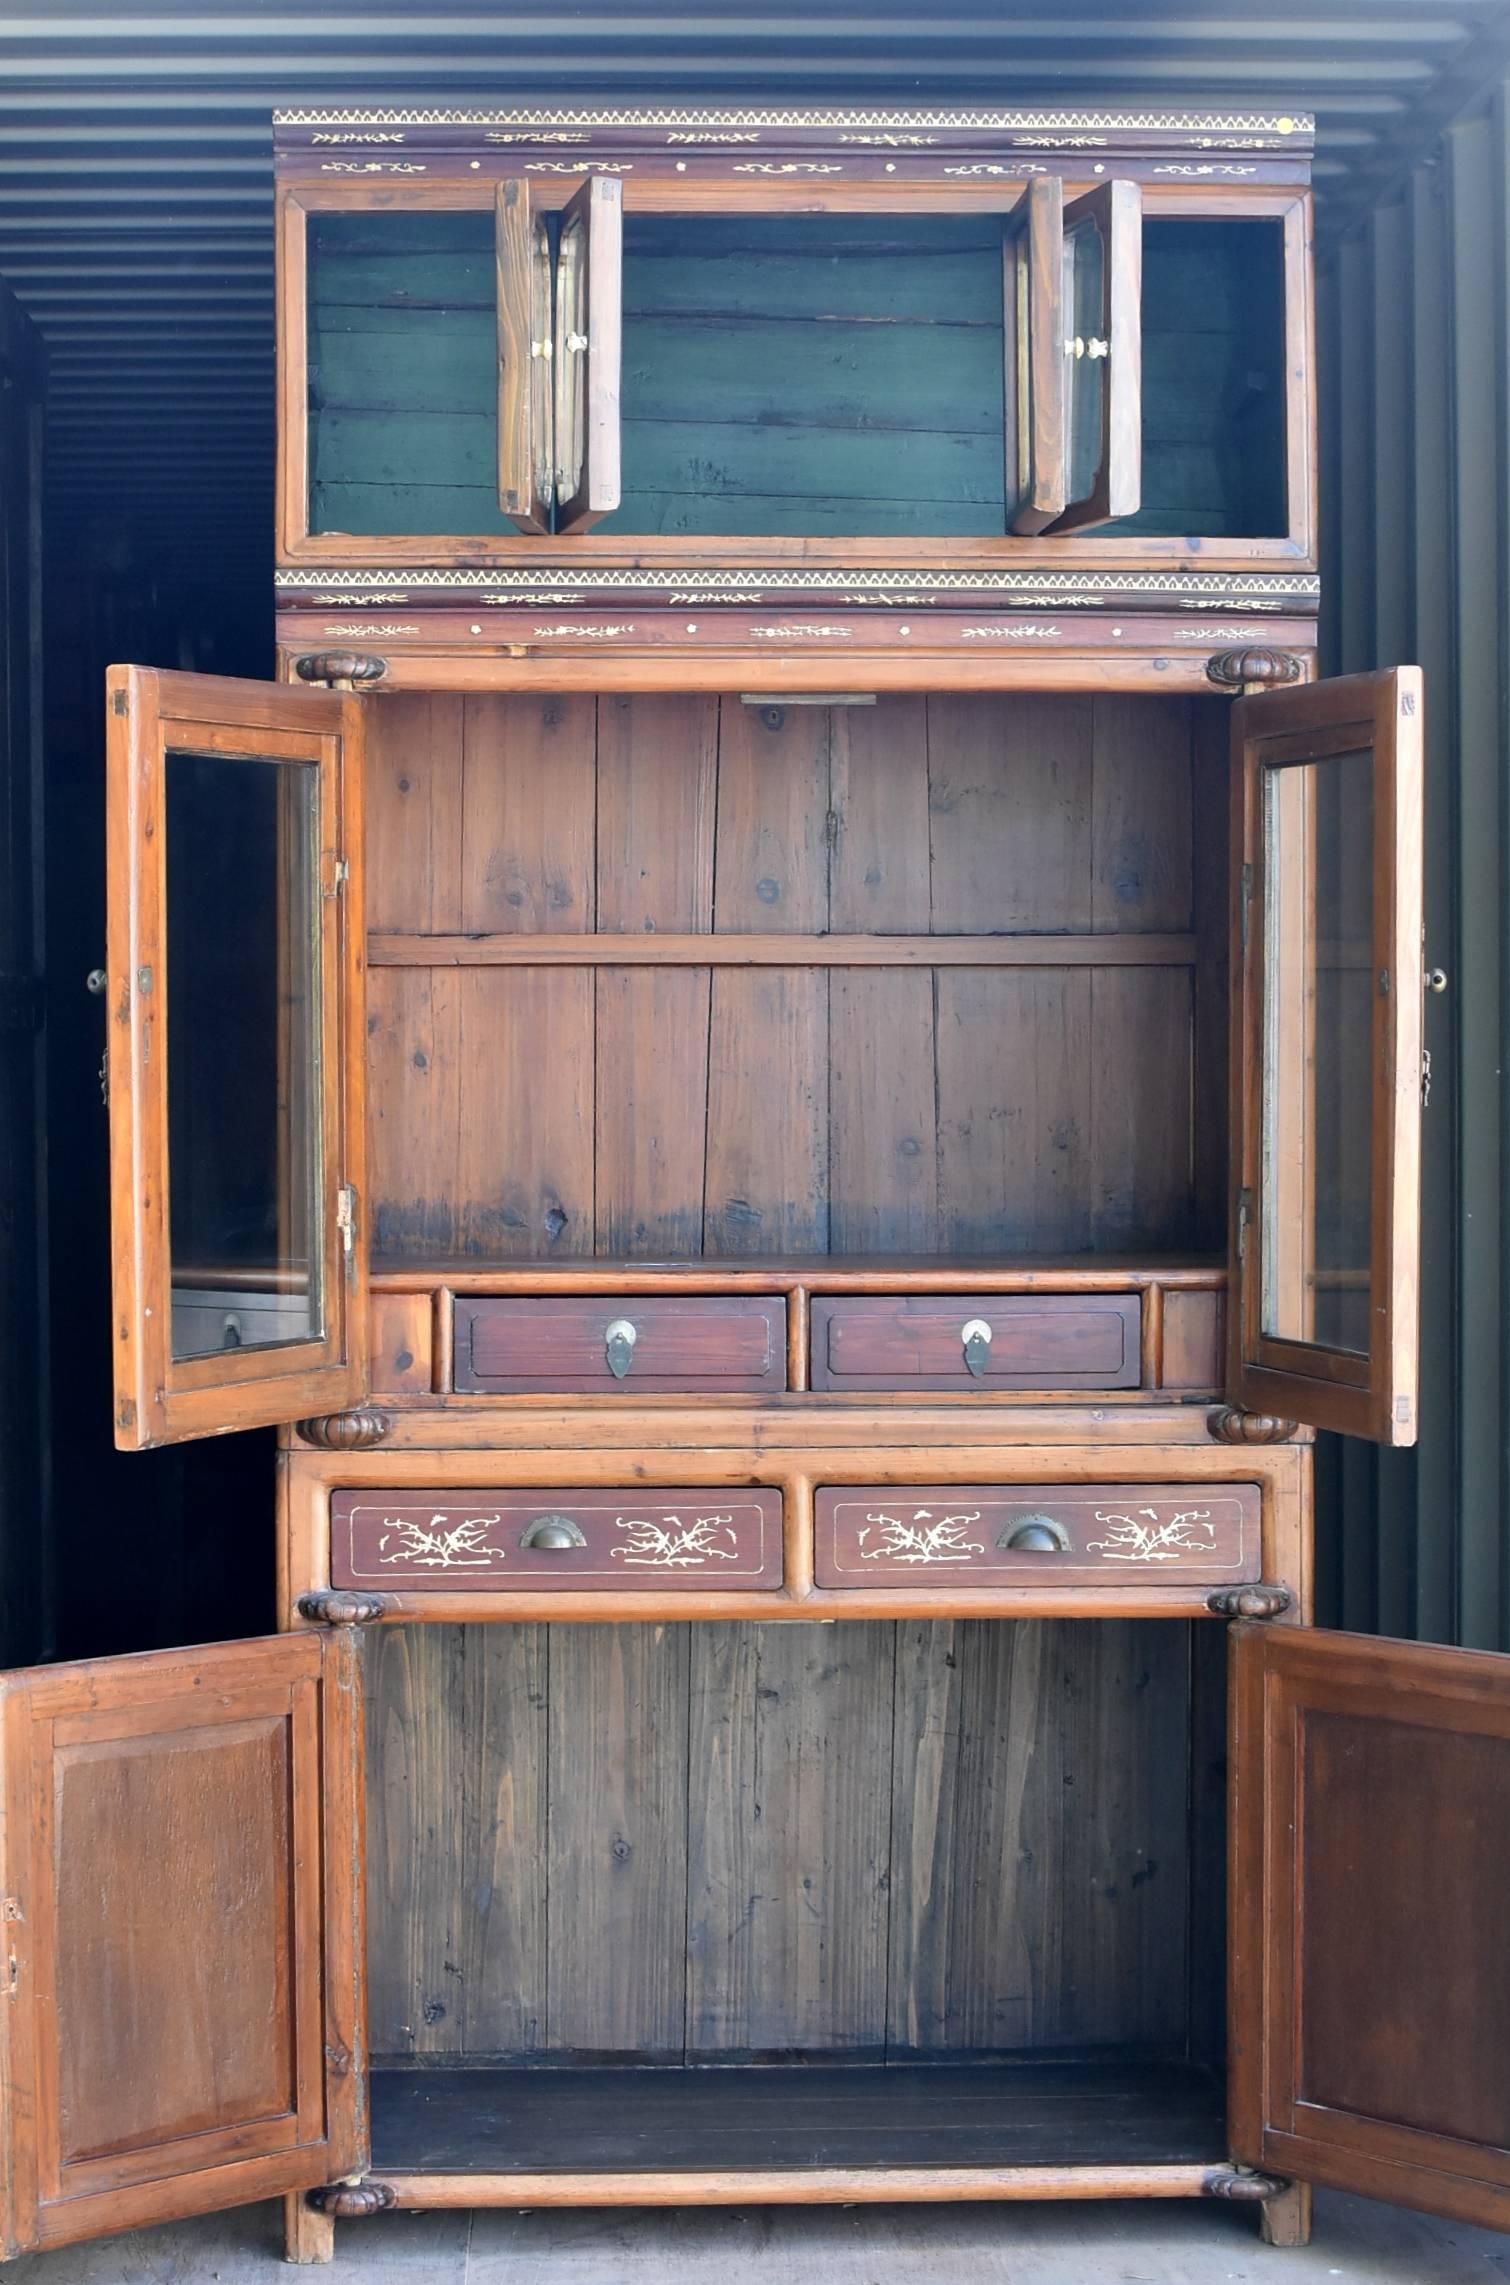 This exceptional 3-tiered piece is an authentic turn of the century antique cabinet from Ning Bo Province. The use of two toned woods is a traditional approach. The darker wood is single panel rosewood, highly prized and desired by the Chinese